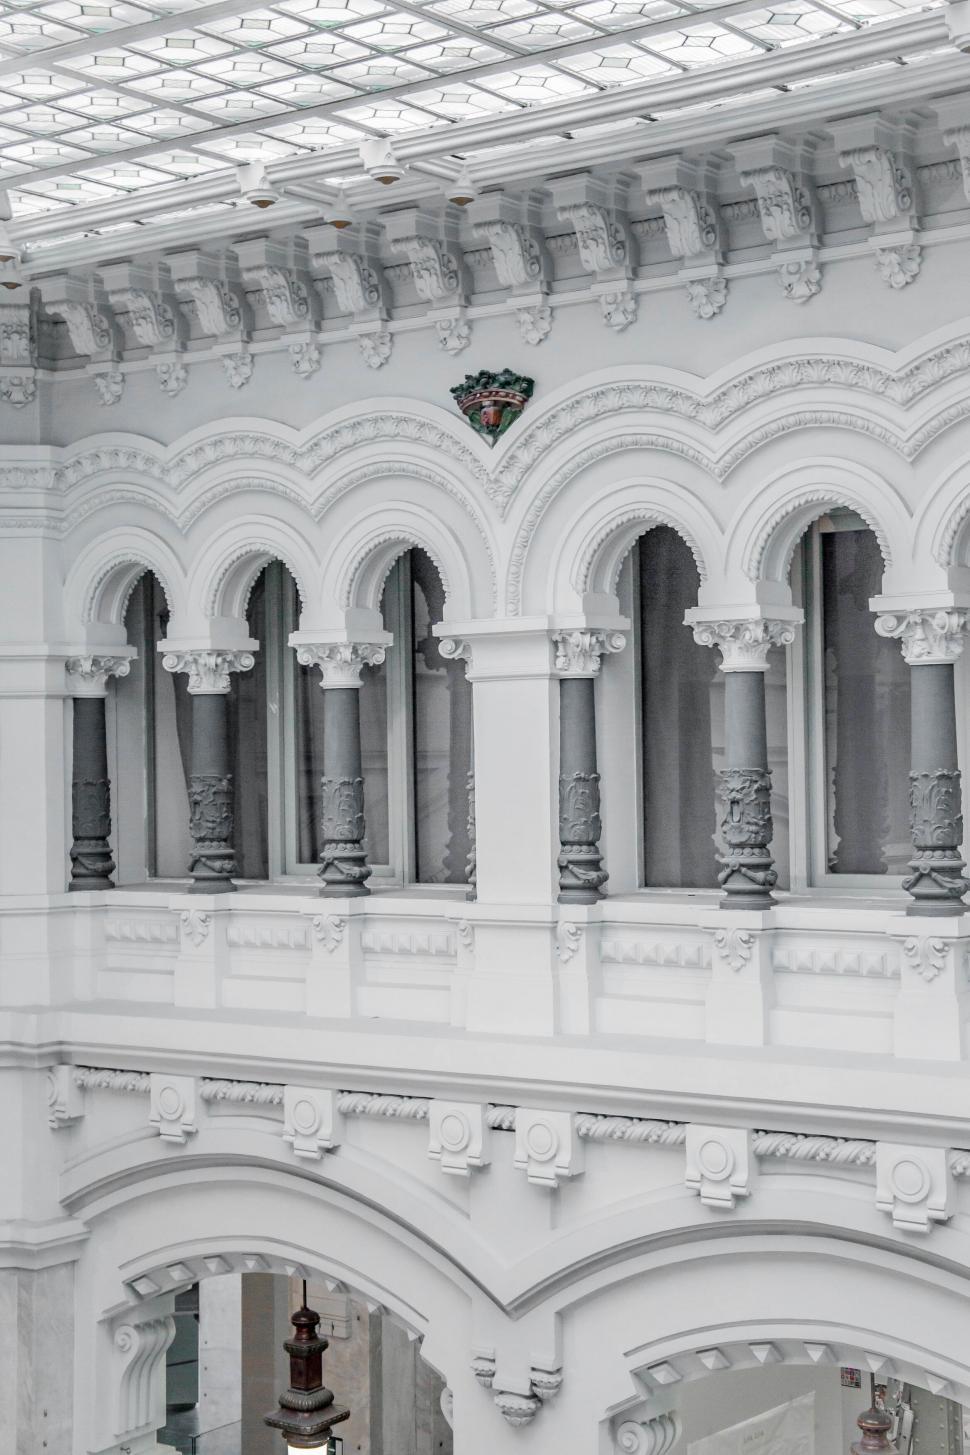 Free Image of Ornate white building interior with arches and columns 